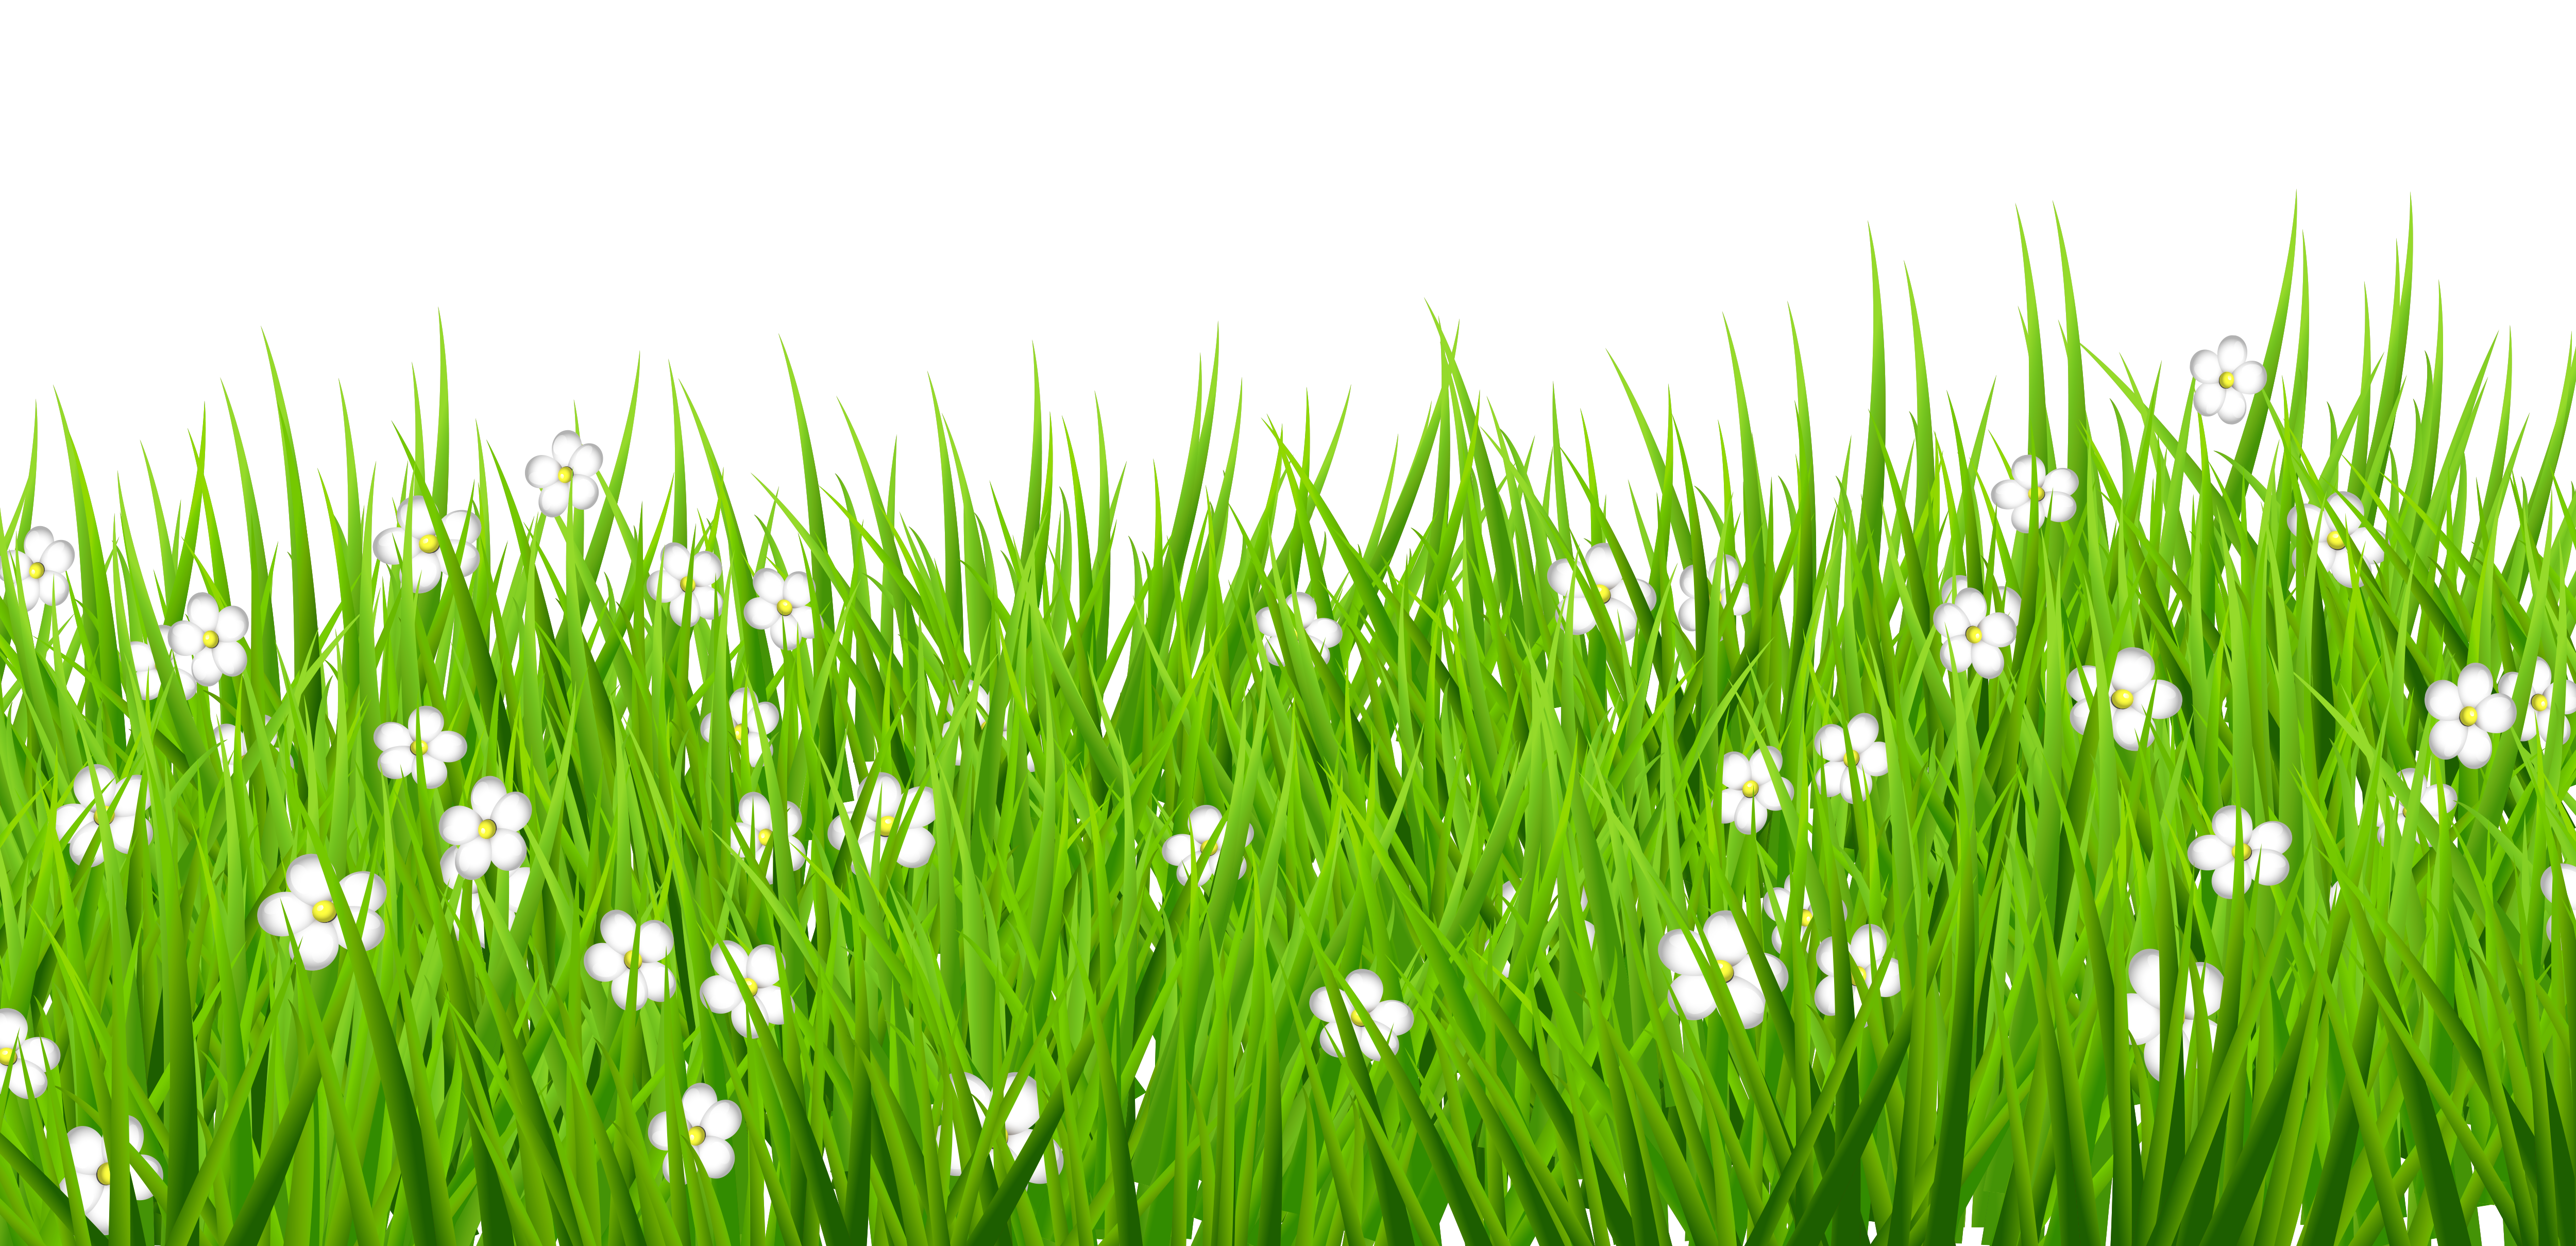 Grass Ground With White Flowers Png Clip Art Image Clip Art Library ...